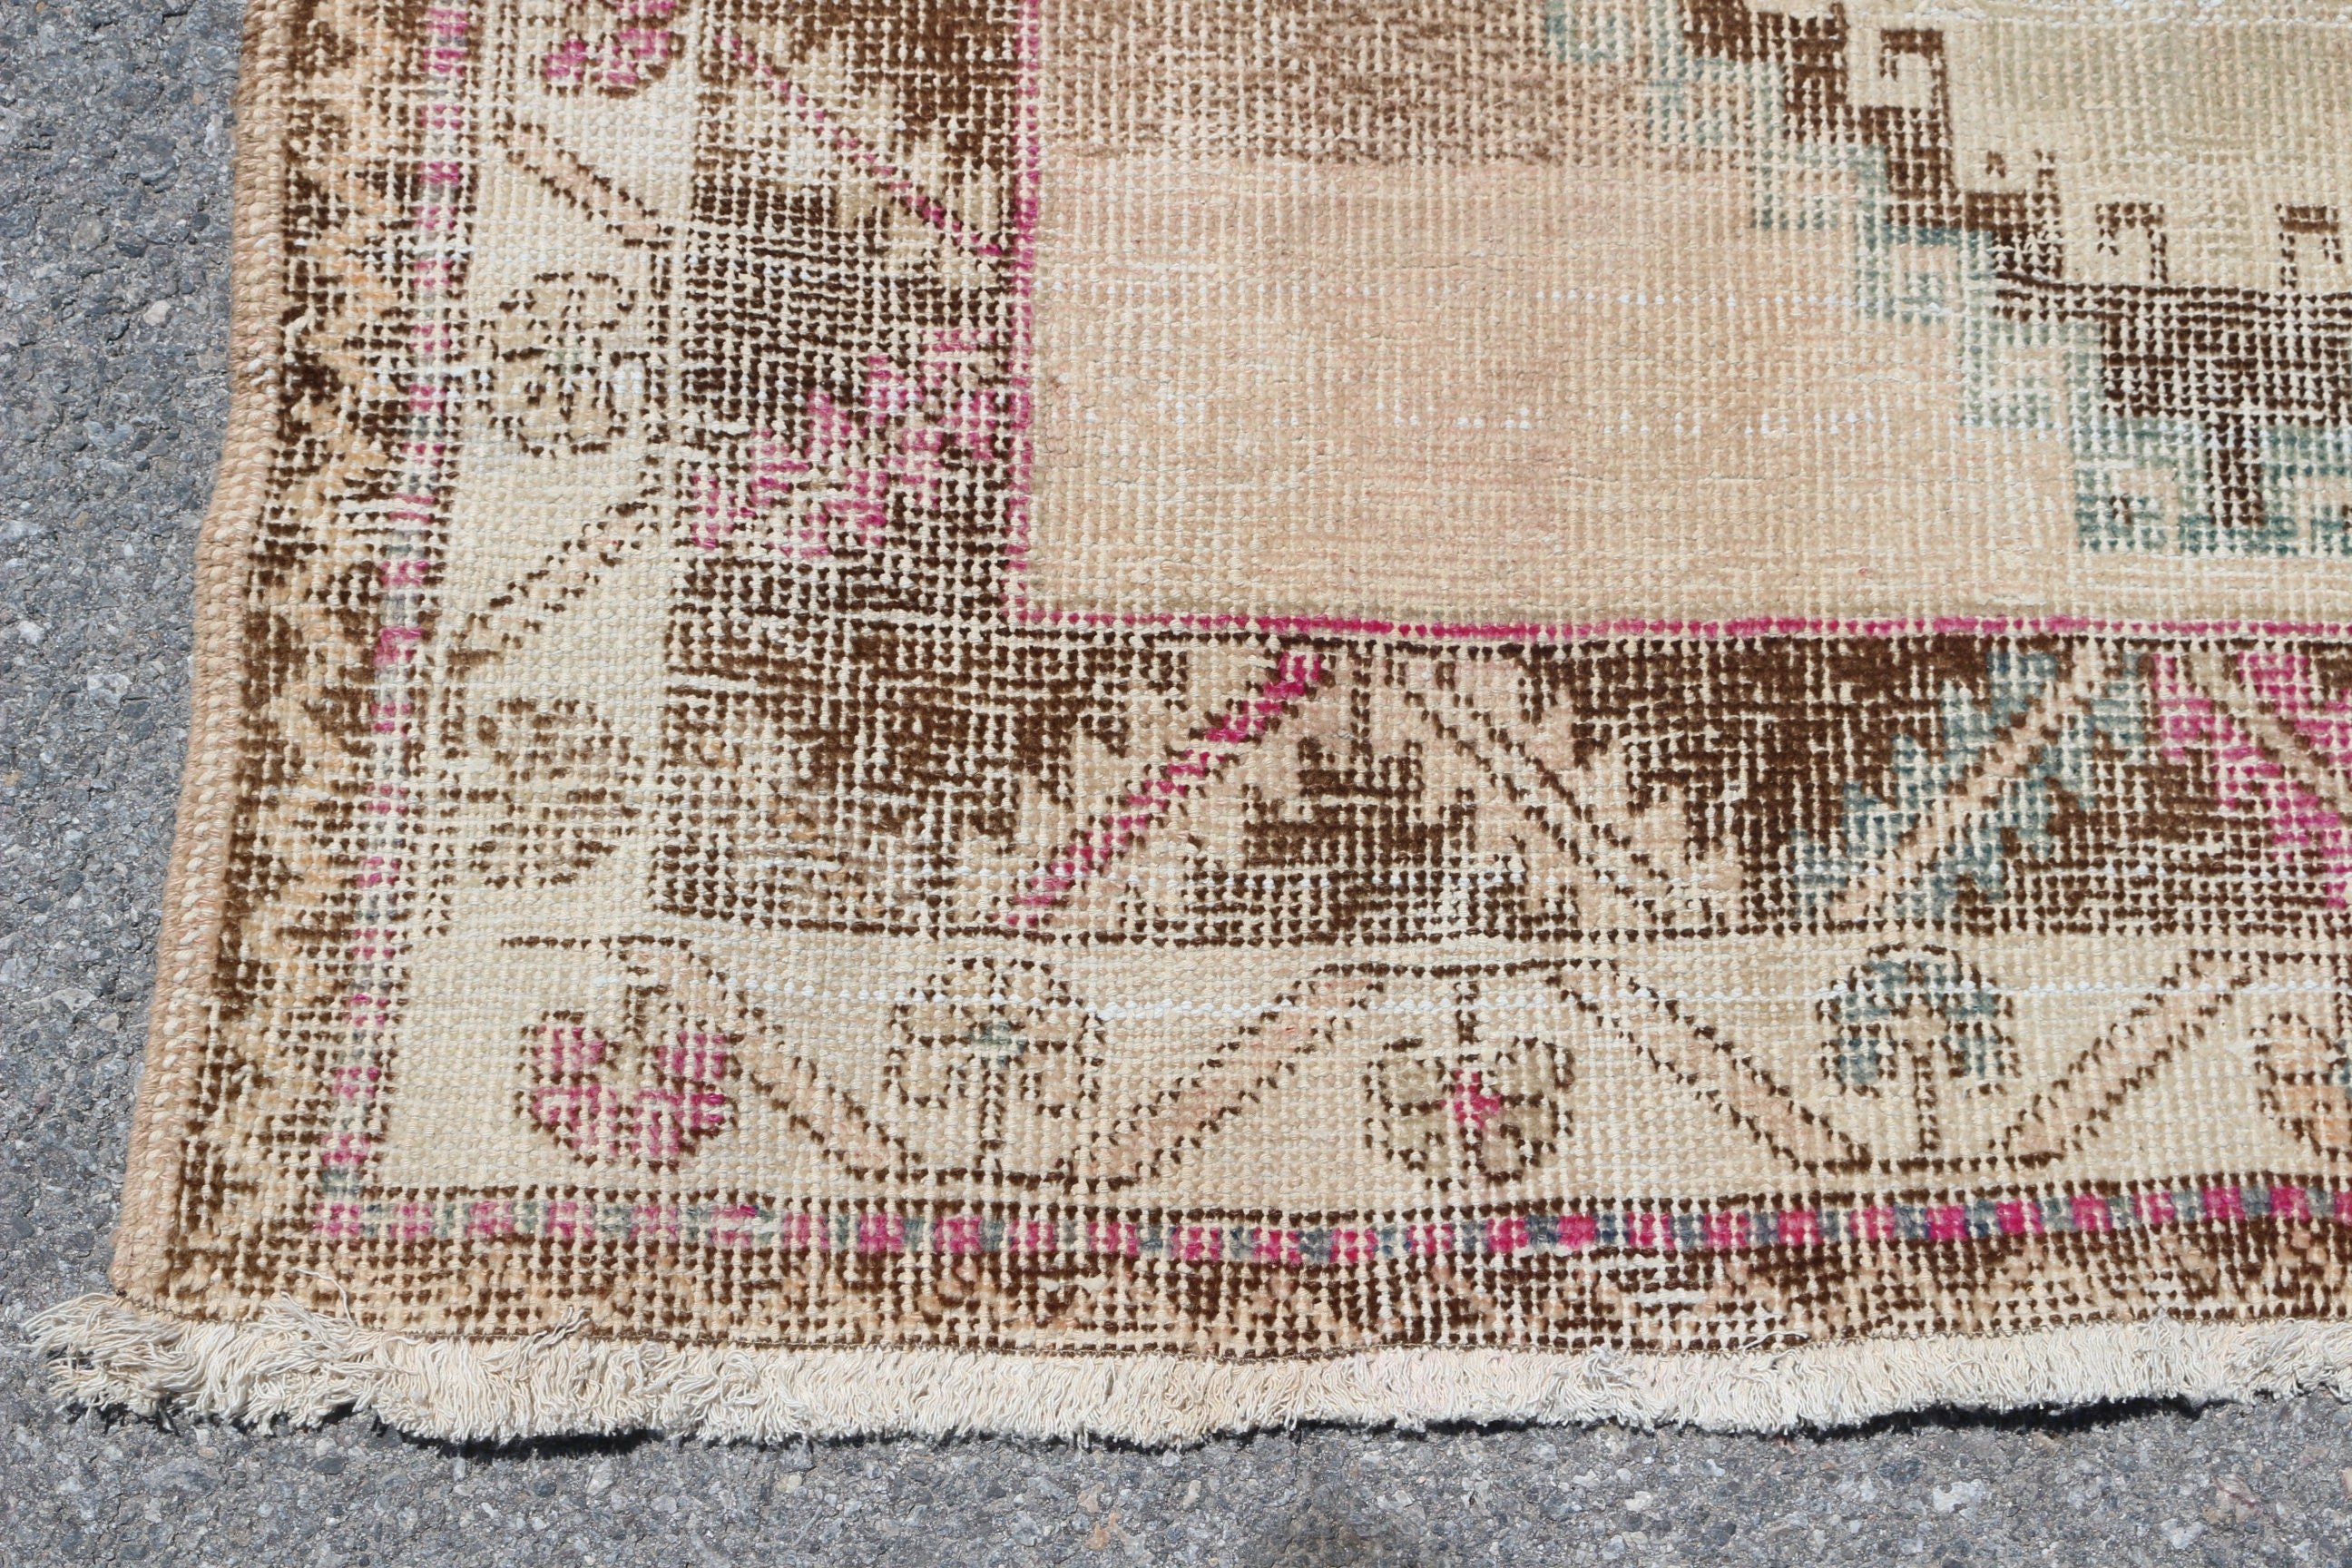 Dining Room Rugs, Vintage Rugs, Anatolian Rugs, Kitchen Rug, Rugs for Kitchen, 4.3x8.2 ft Area Rug, Turkish Rugs, Beige Home Decor Rug